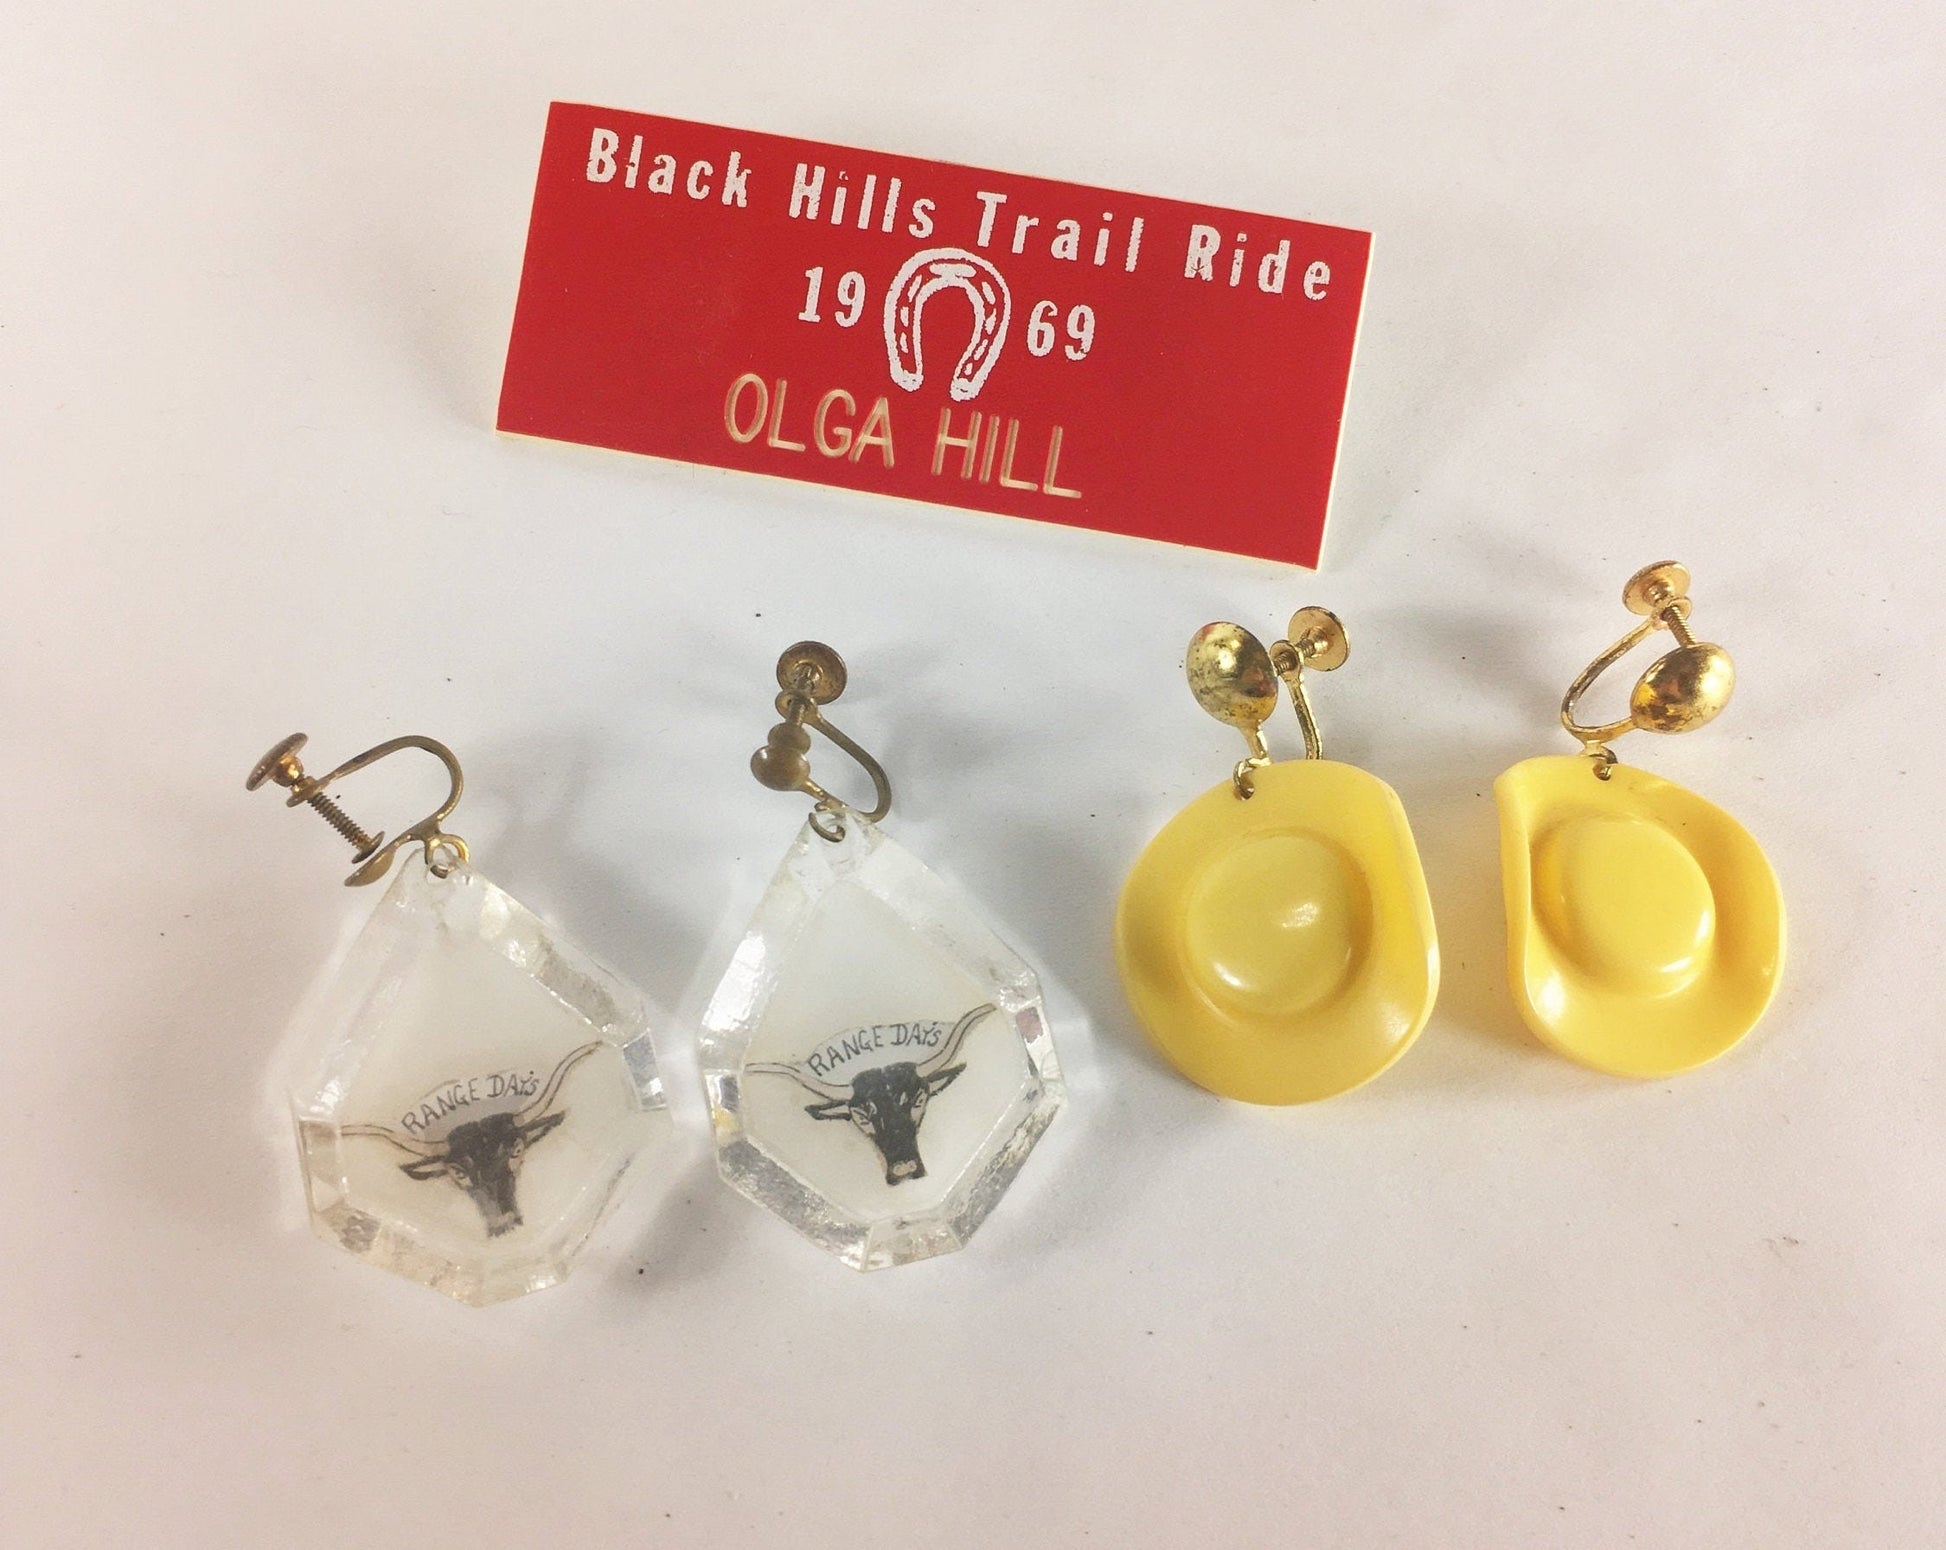 1969 vintage Texas rodeo clip-on earrings and pin lot Houston Range Days Austin Longhorn collectible jewelry. Yellow cowboy hat, teardrop